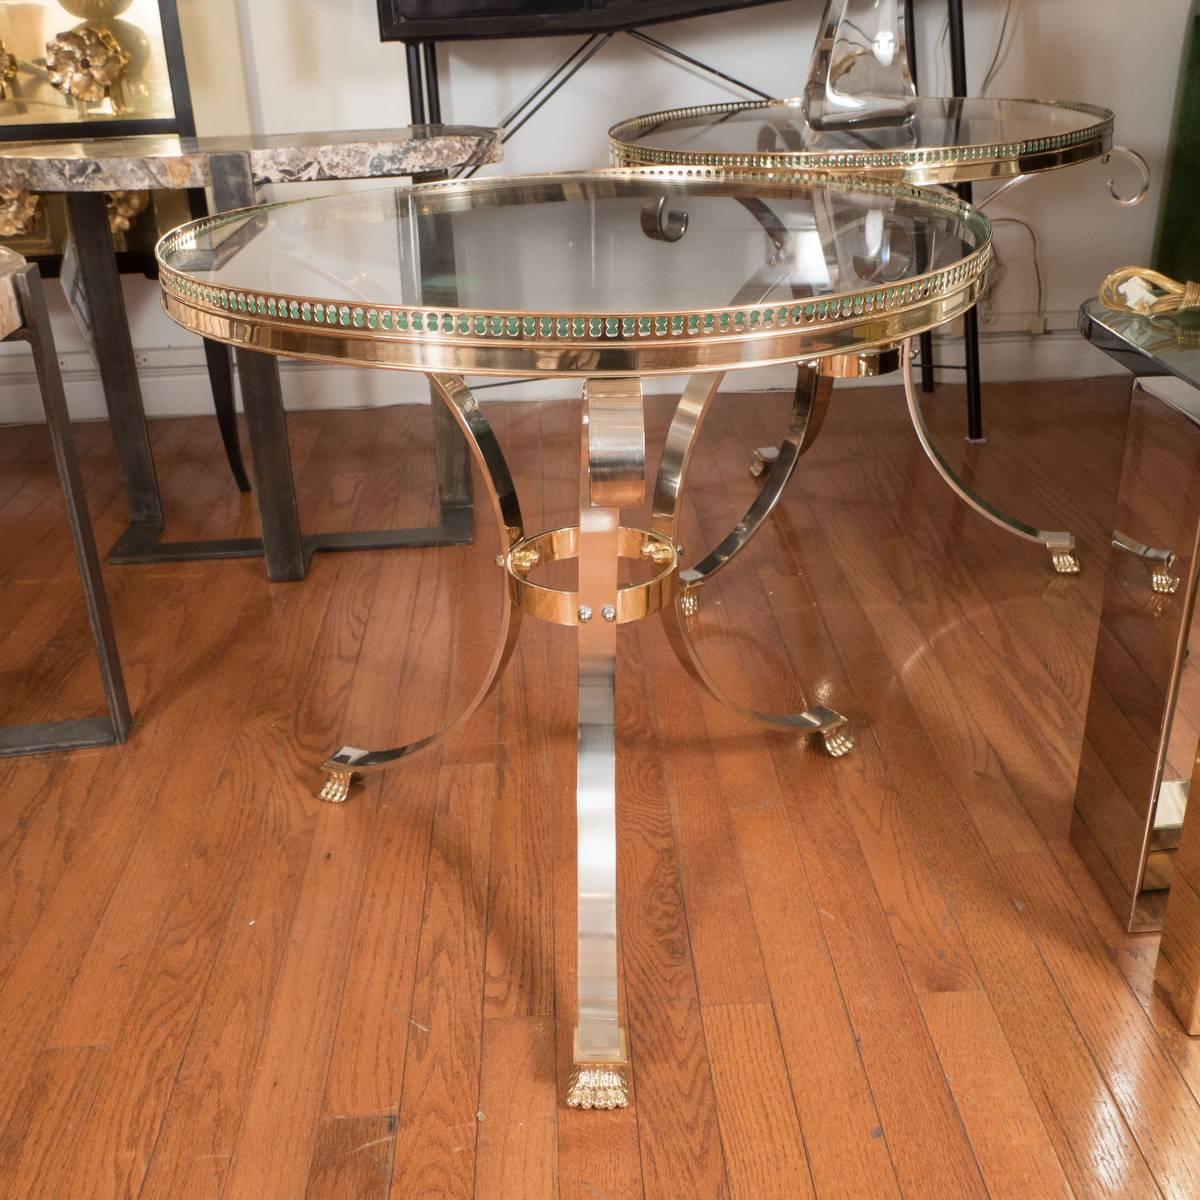 Pair of polished nickel and brass tripod tables with pierced galley edge.